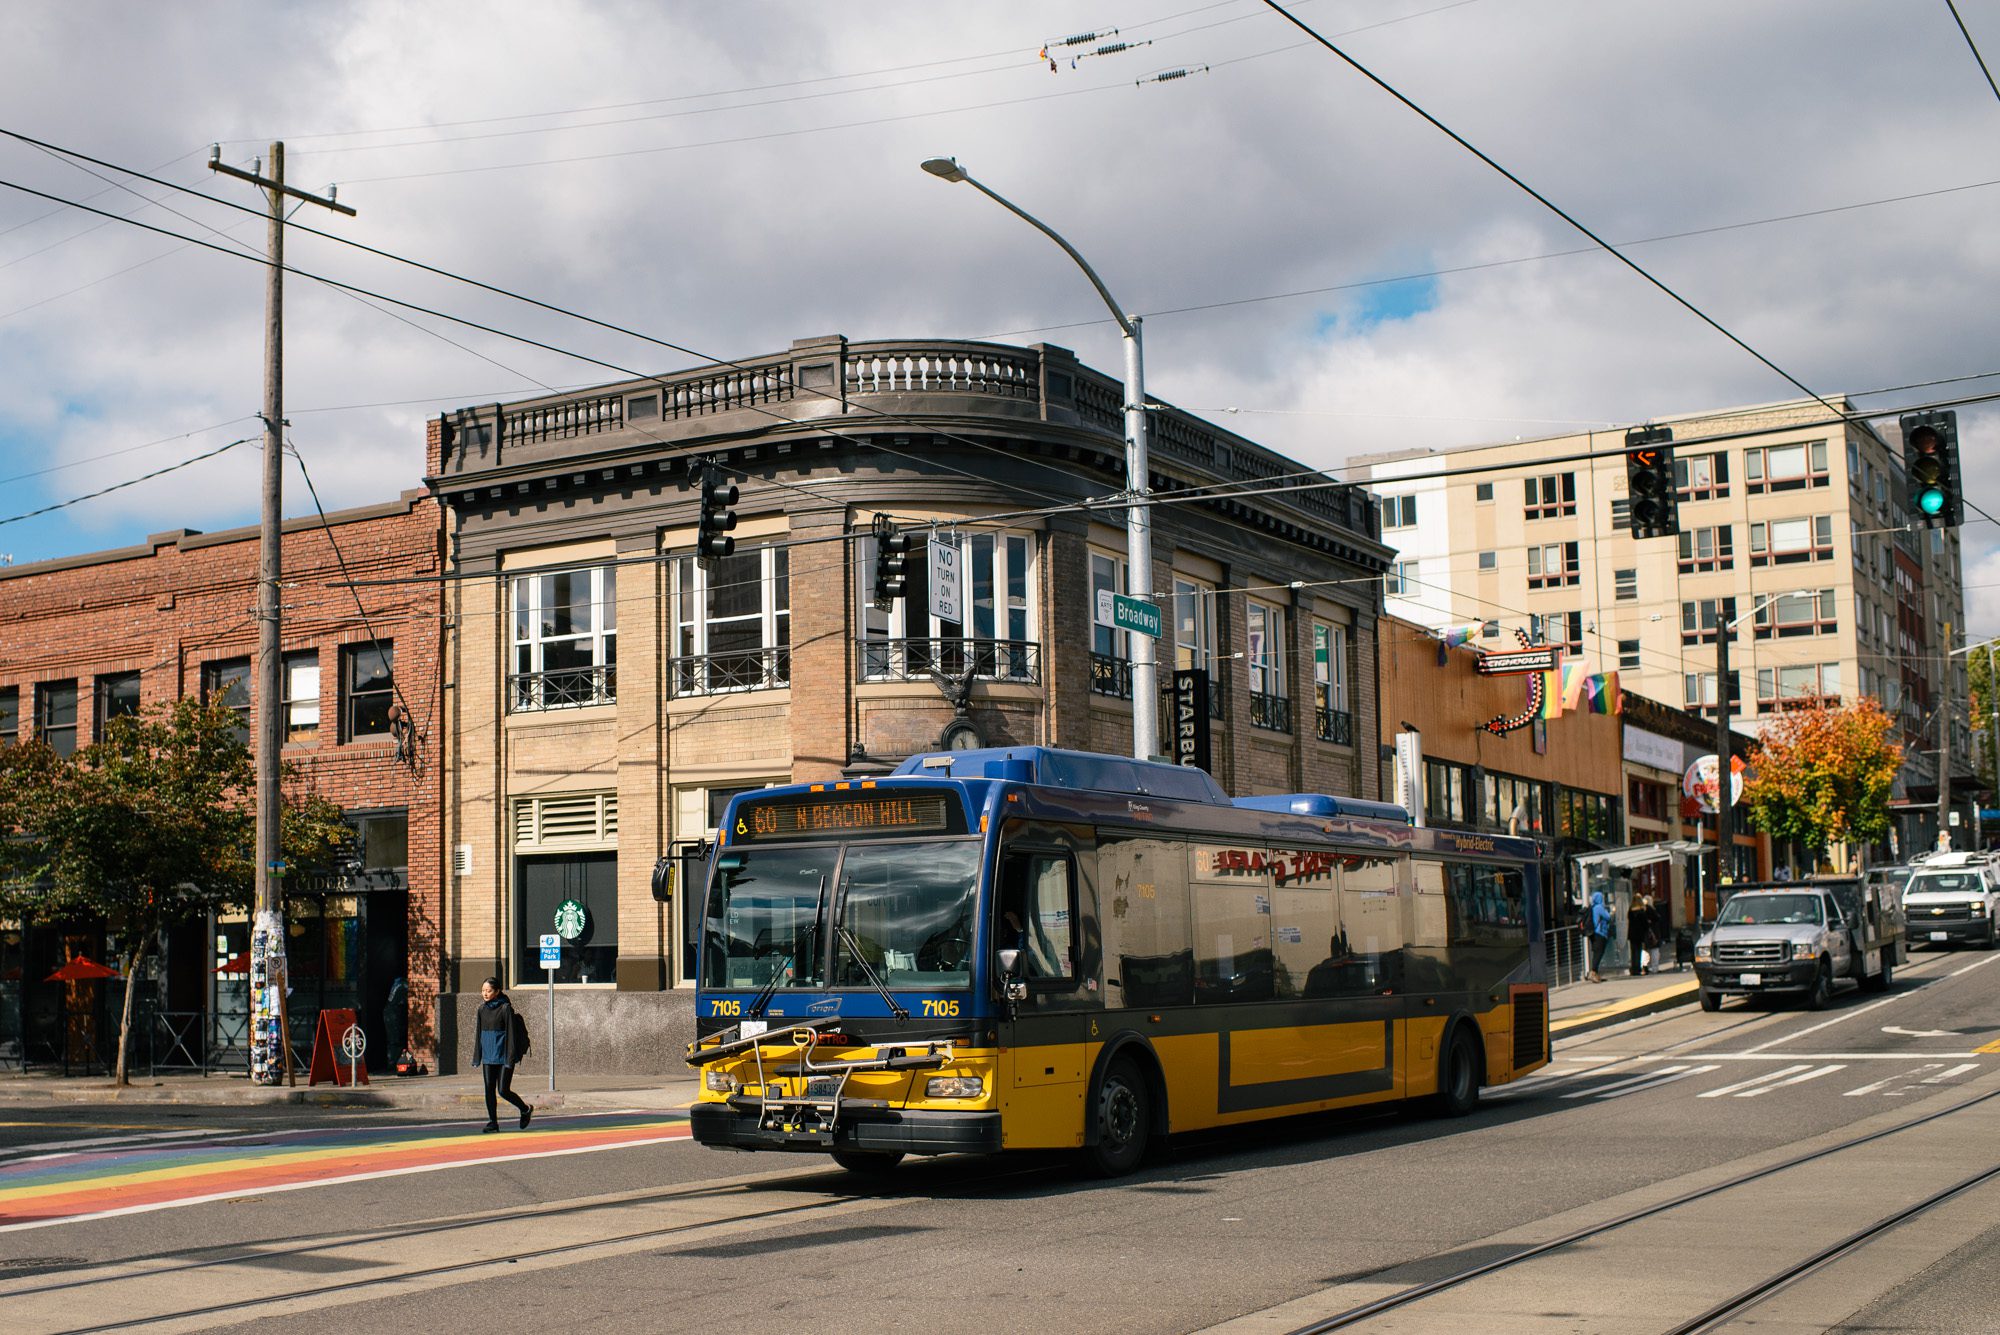 A Route 60 bus to north Beacon Hill travels down the street on a partly cloudy, partly sunny day. A person walking crosses the street to the left, while two trucks travel in the street behind the bus.